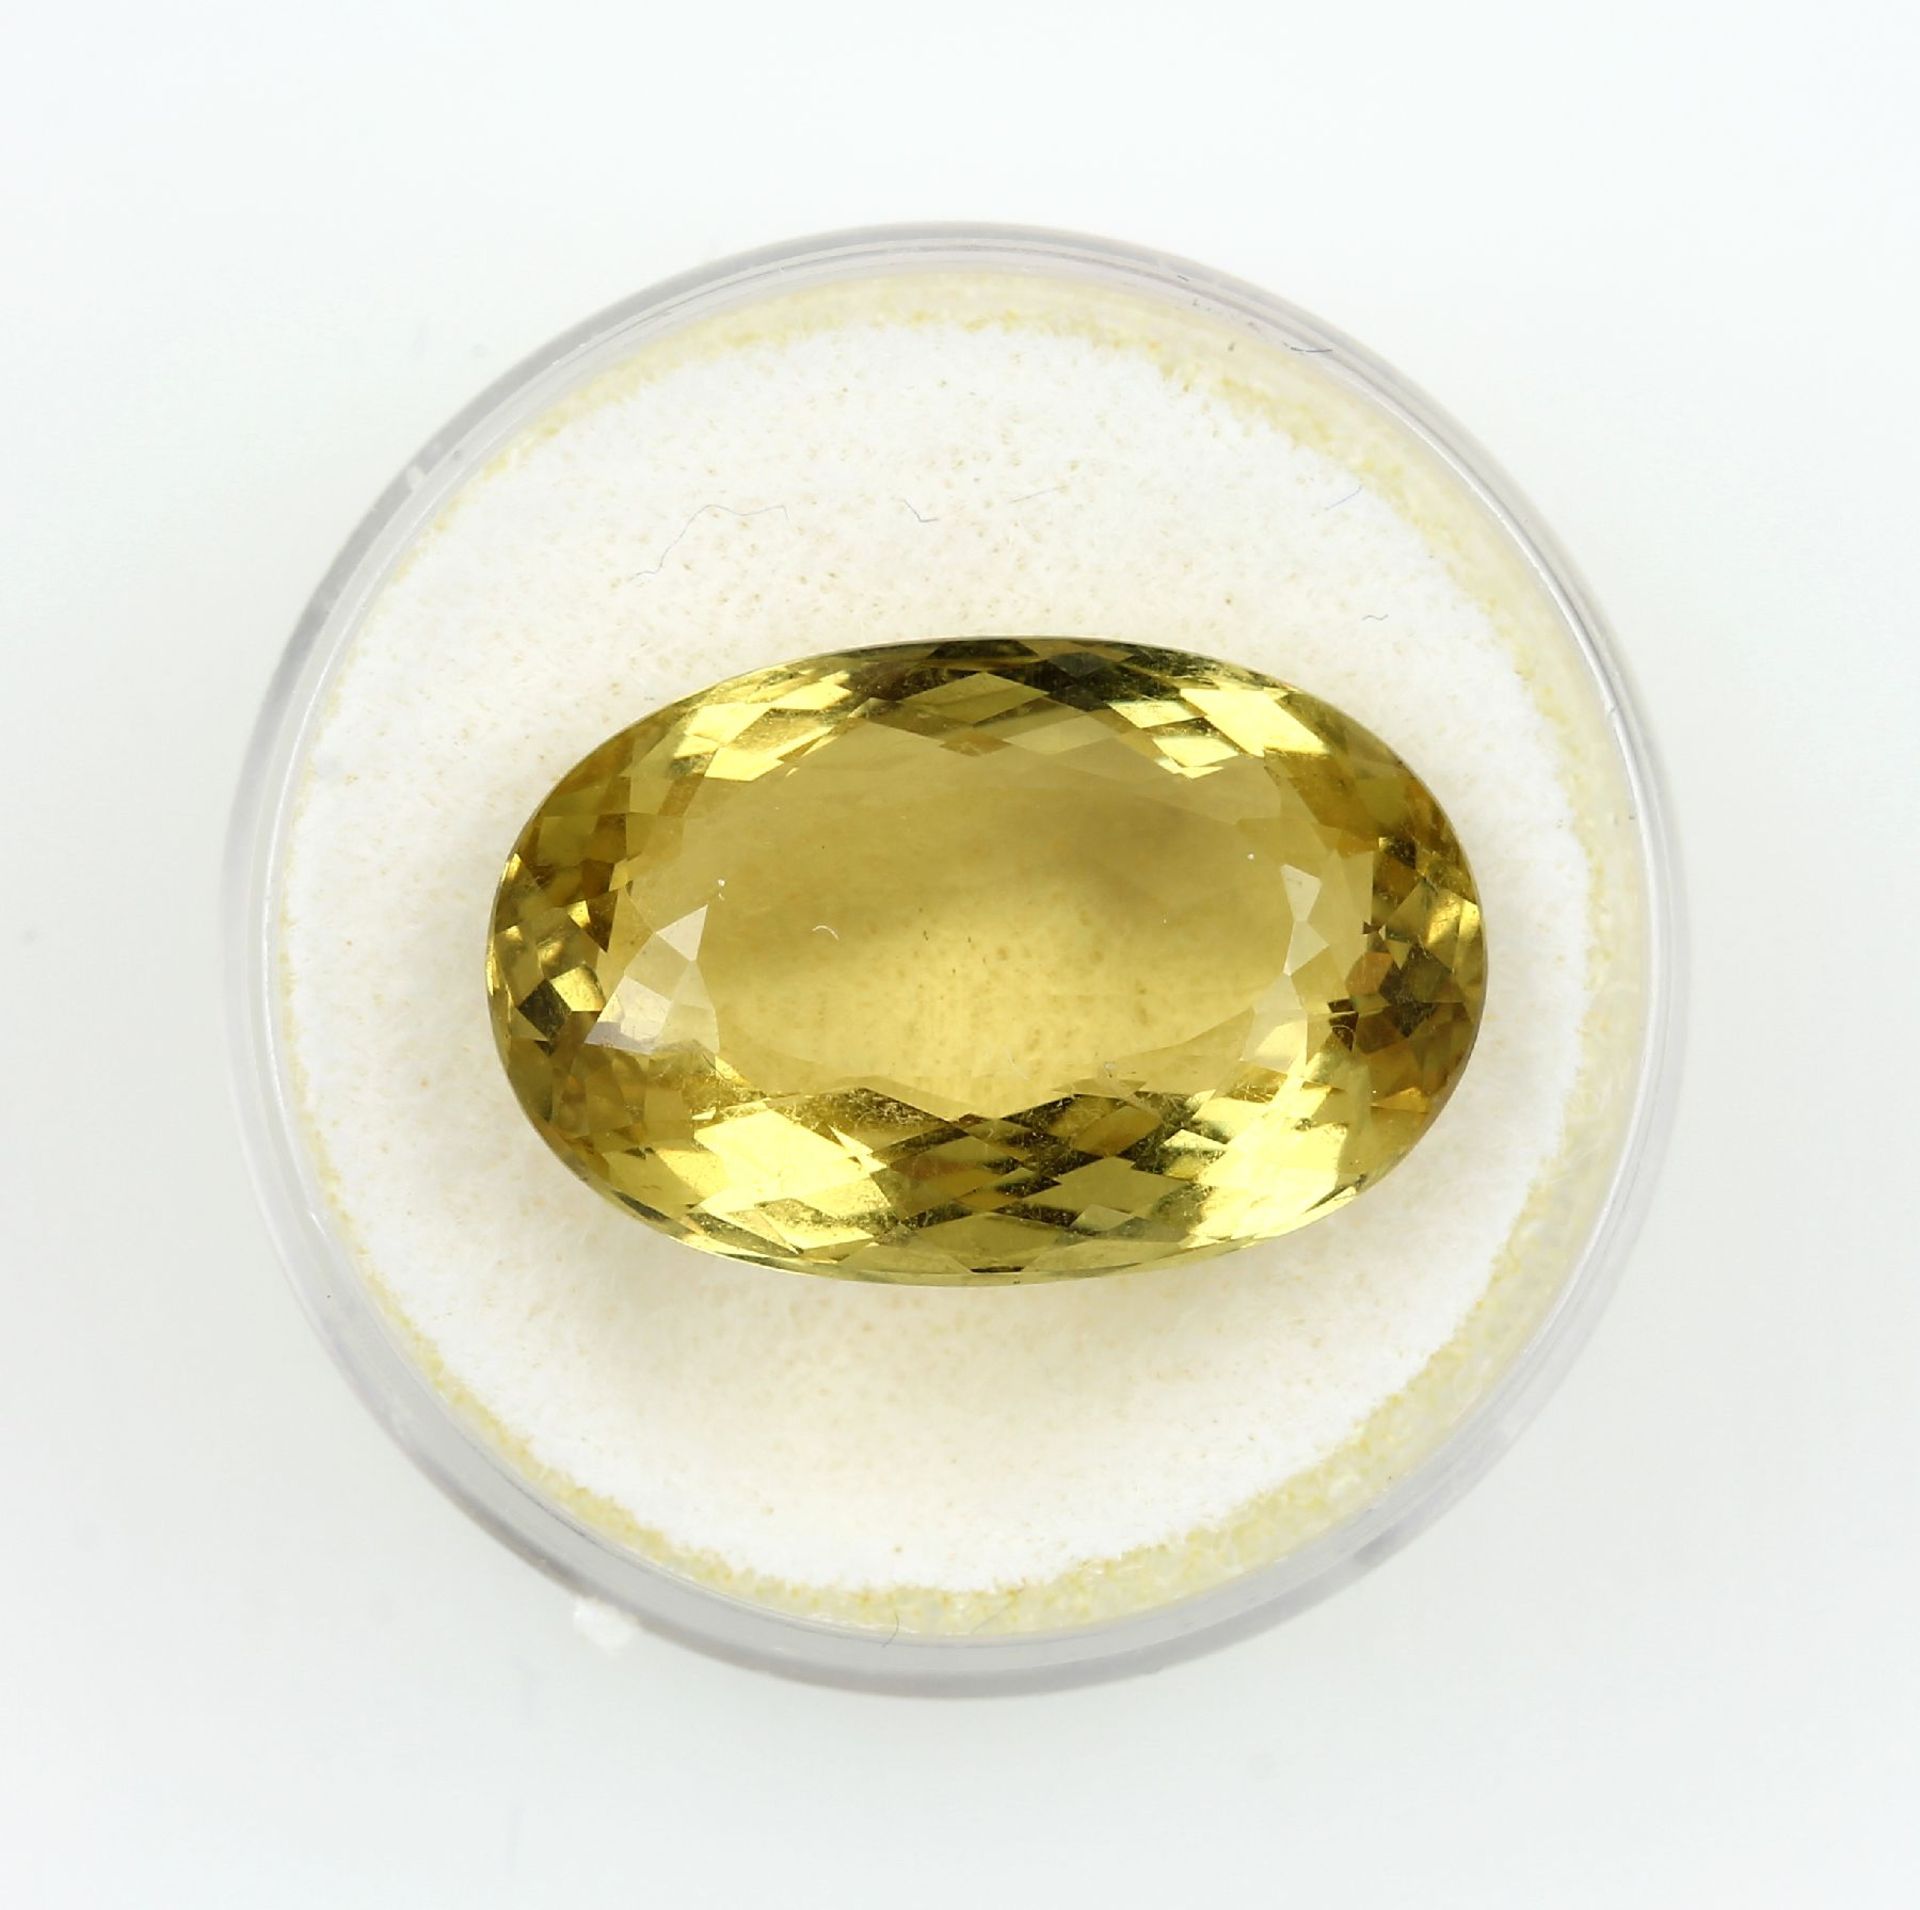 Loose beryl, yellow, oval bevelled, approx. 13.14 ct Valuation Price: 1400, - EURLoser Beryll, gelb,